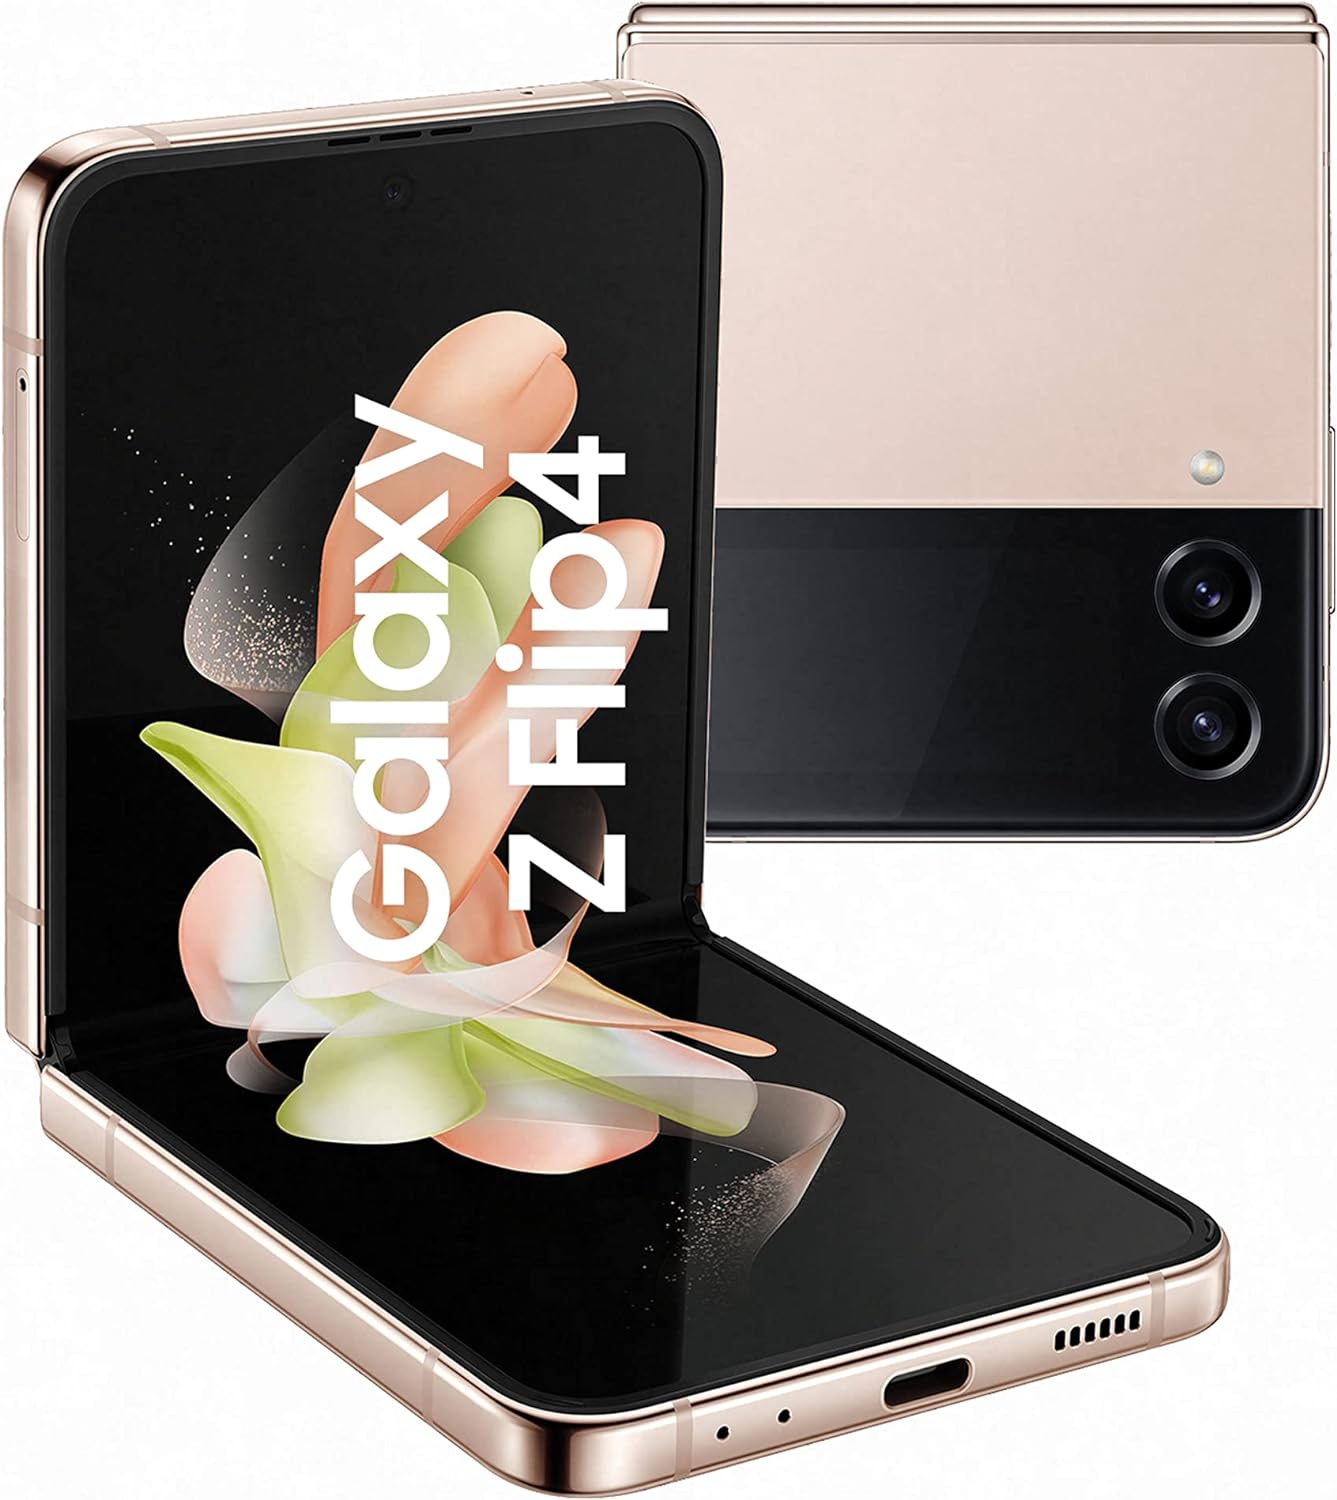 Samsung Galaxy Z Flip4 Dual SIM Smartphone in Pink Gold - Compact design with a hazy glass finish and glossy metal frame. 8806094602272